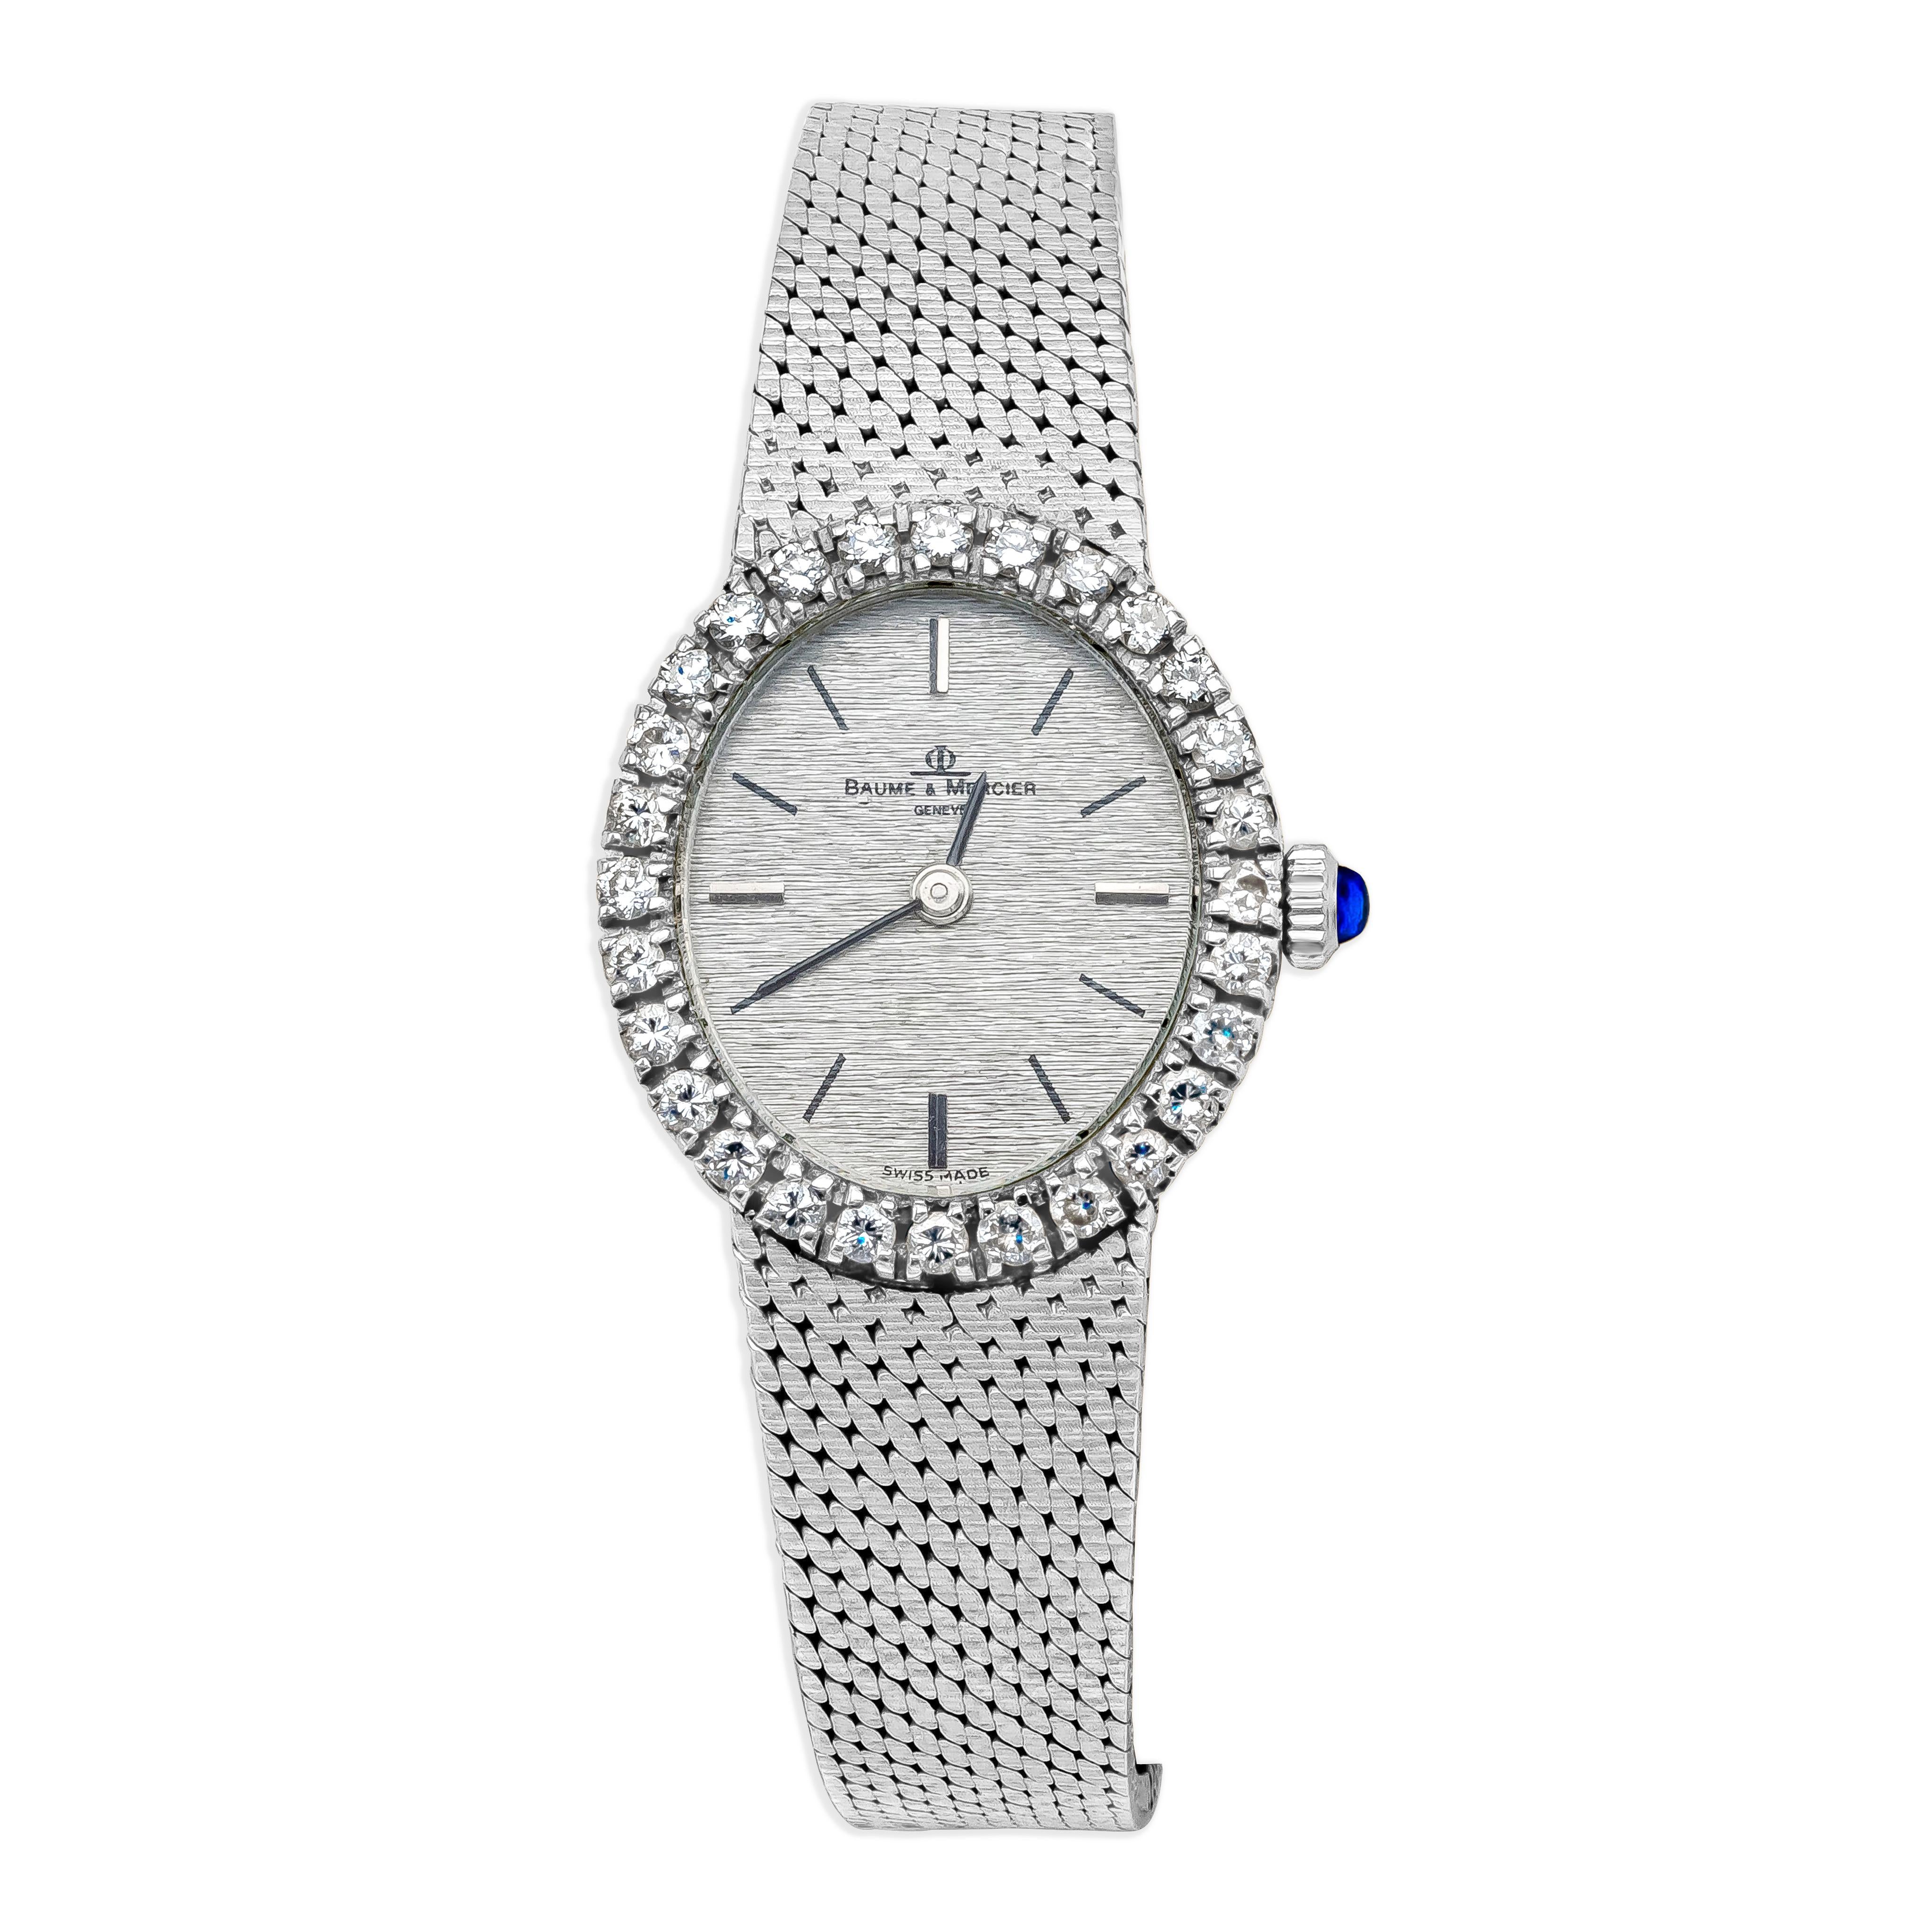 A very beautiful vintage Baume & Mercier ladies cocktail watch in 18k white gold. Decorated with original diamond bezel, with an elegant white gold dial, and a beautiful braided bracelet in white gold. Fine mechanical movement with manual winding,